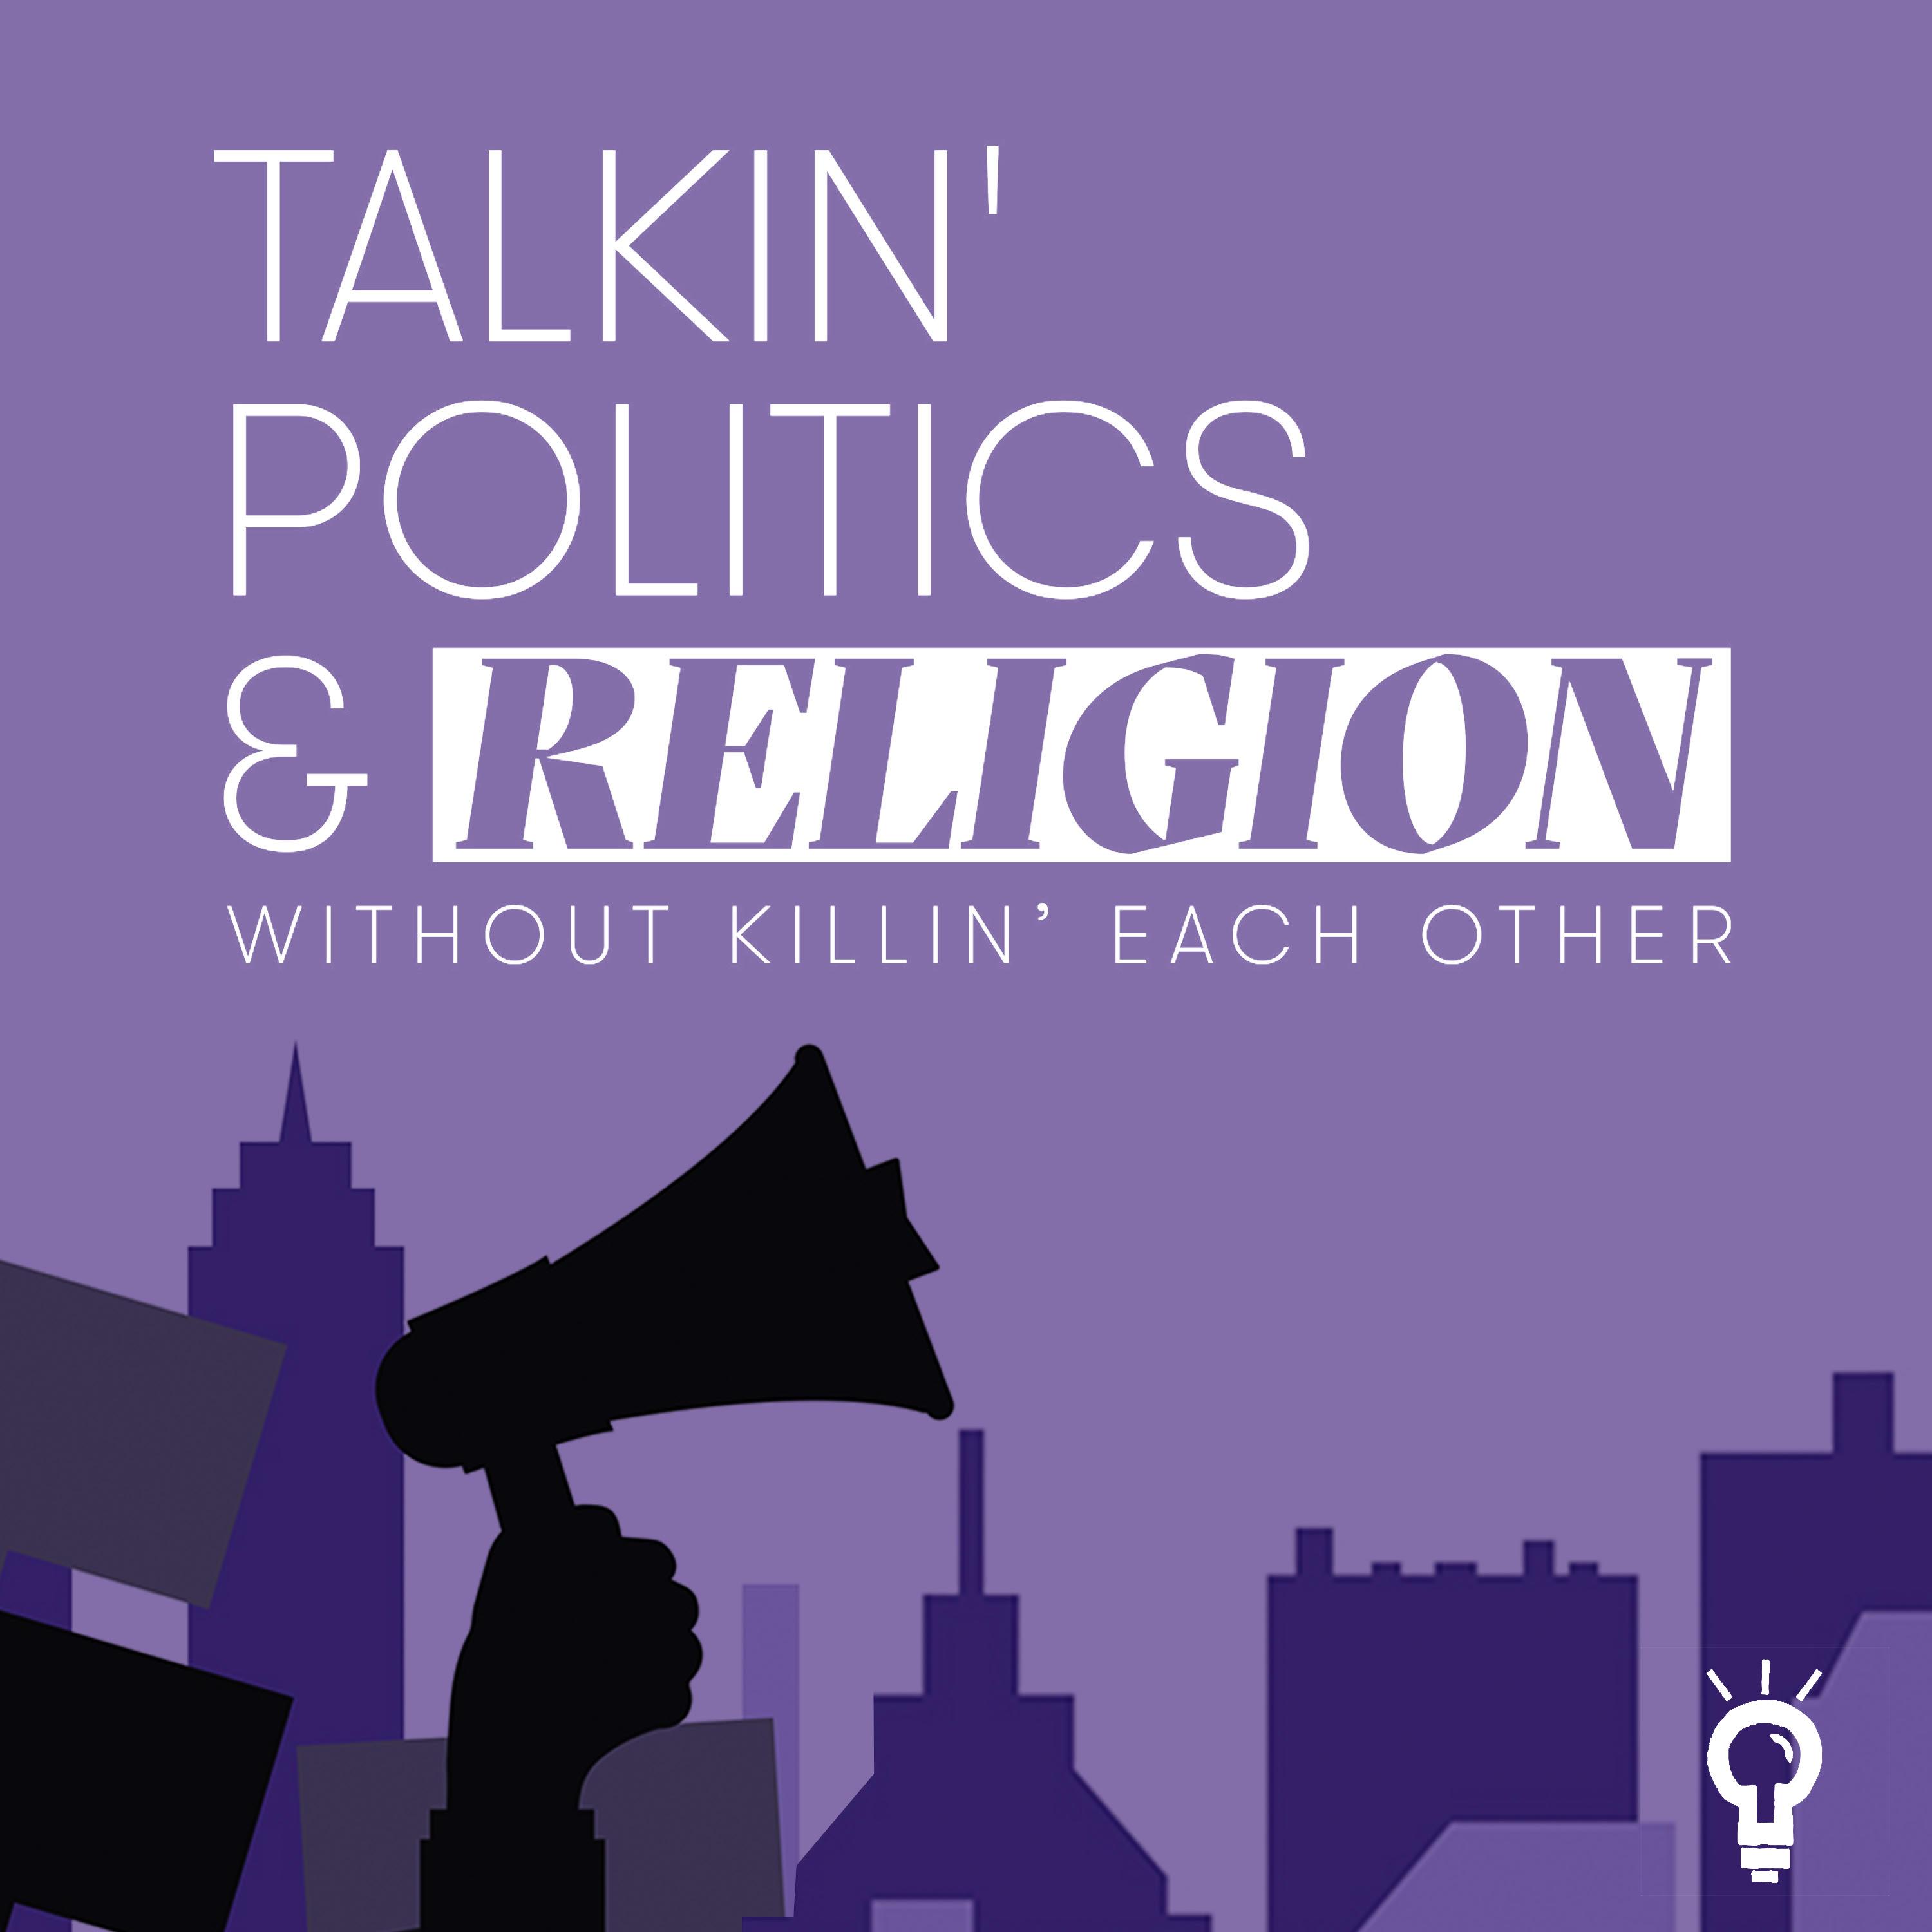 Talkin‘ Politics & Religion Without Killin‘ Each Other podcast show image